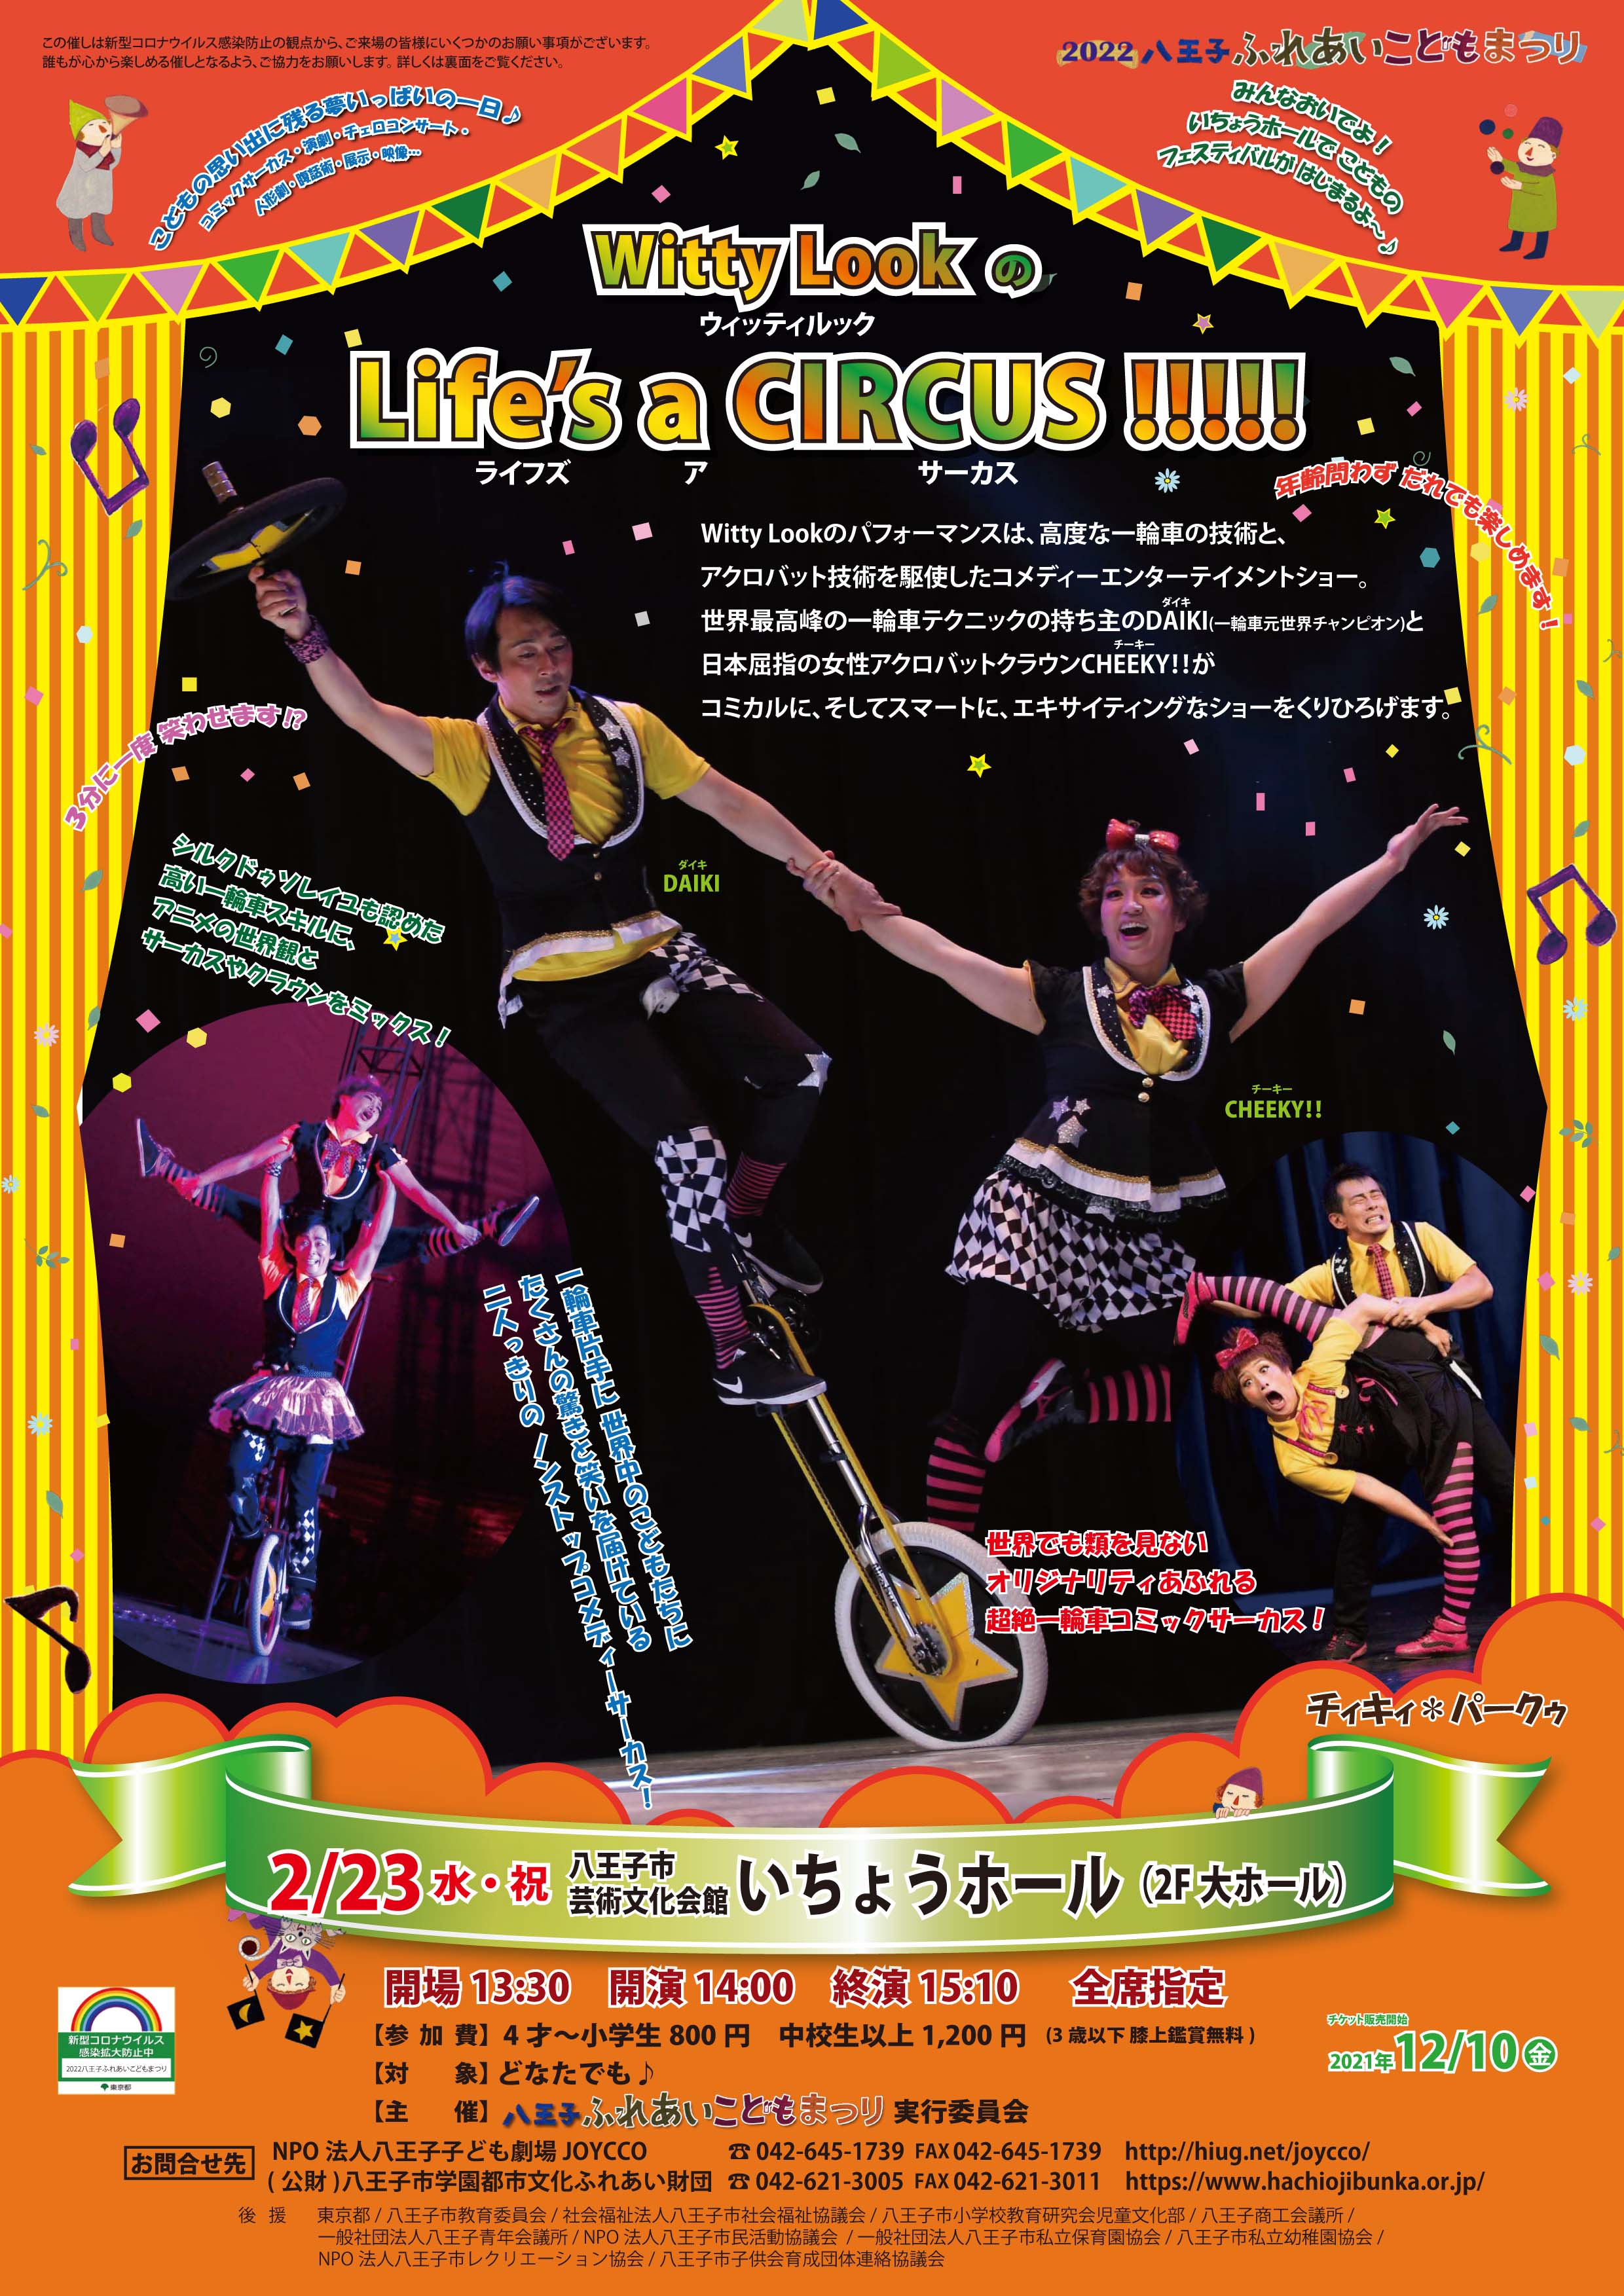 「Witty LookのLife's a CIRCUS!!!!」チラシ